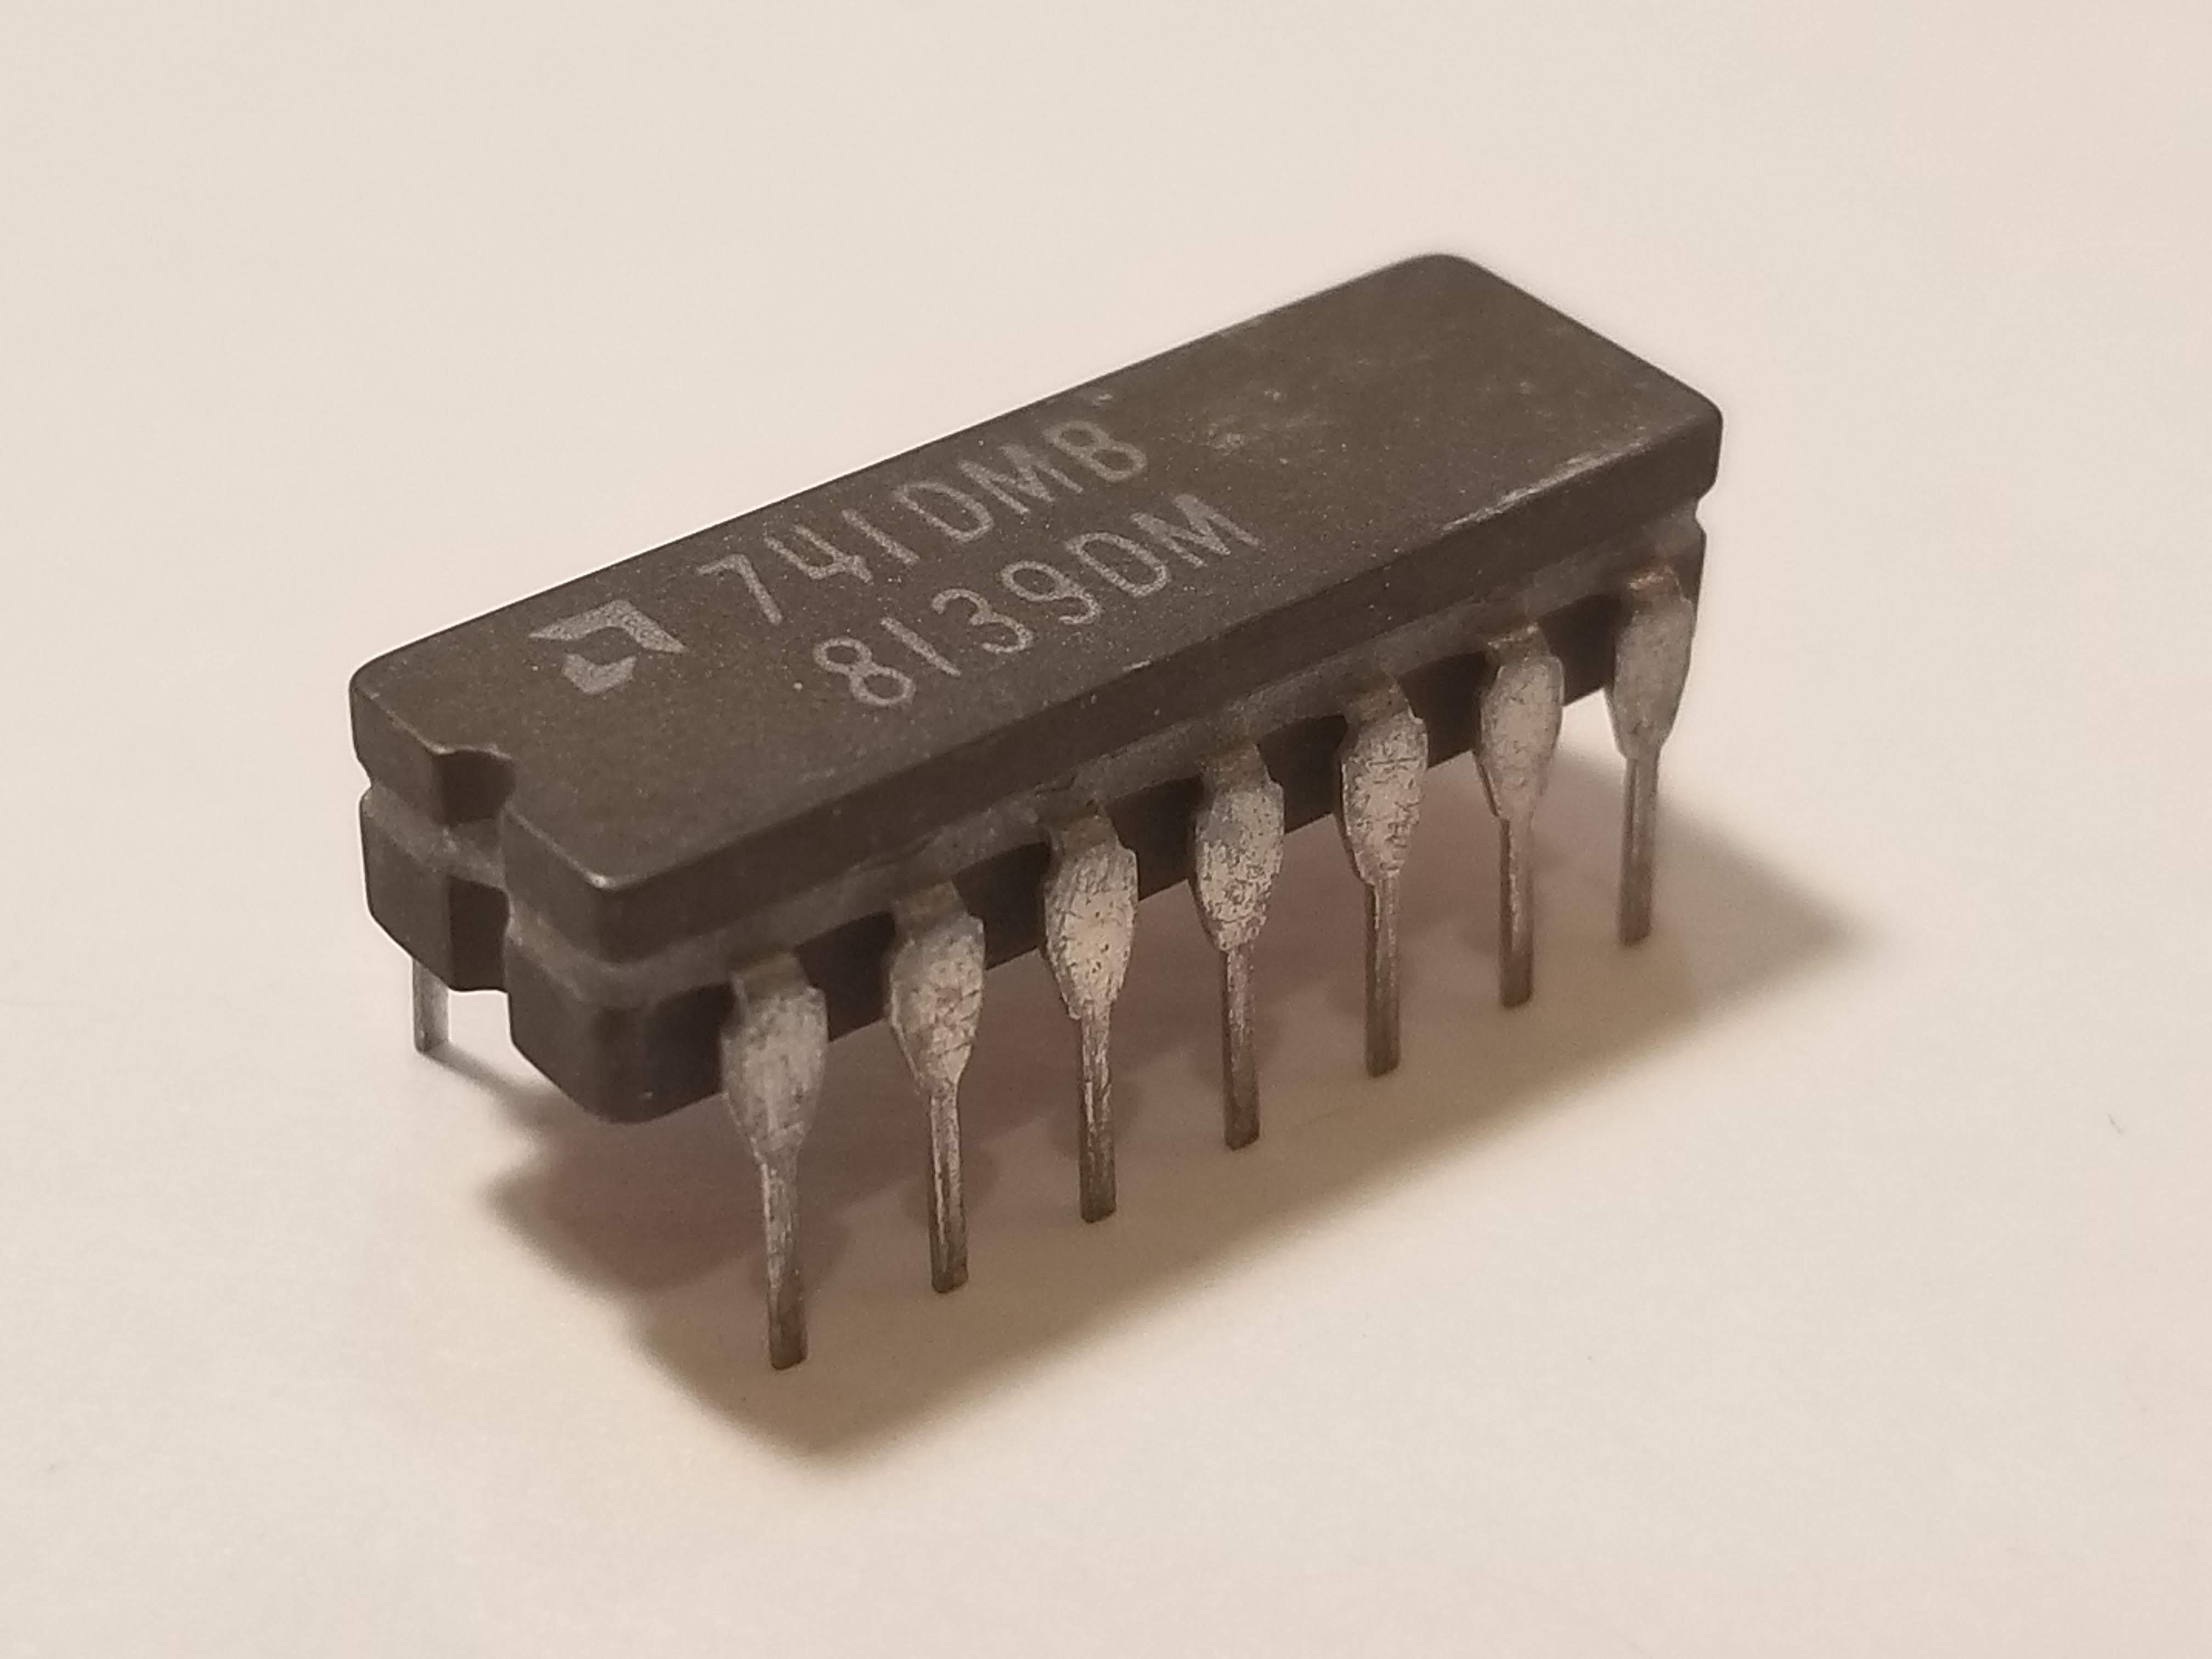 Picture of LM747 Dual 741 Op-Amp